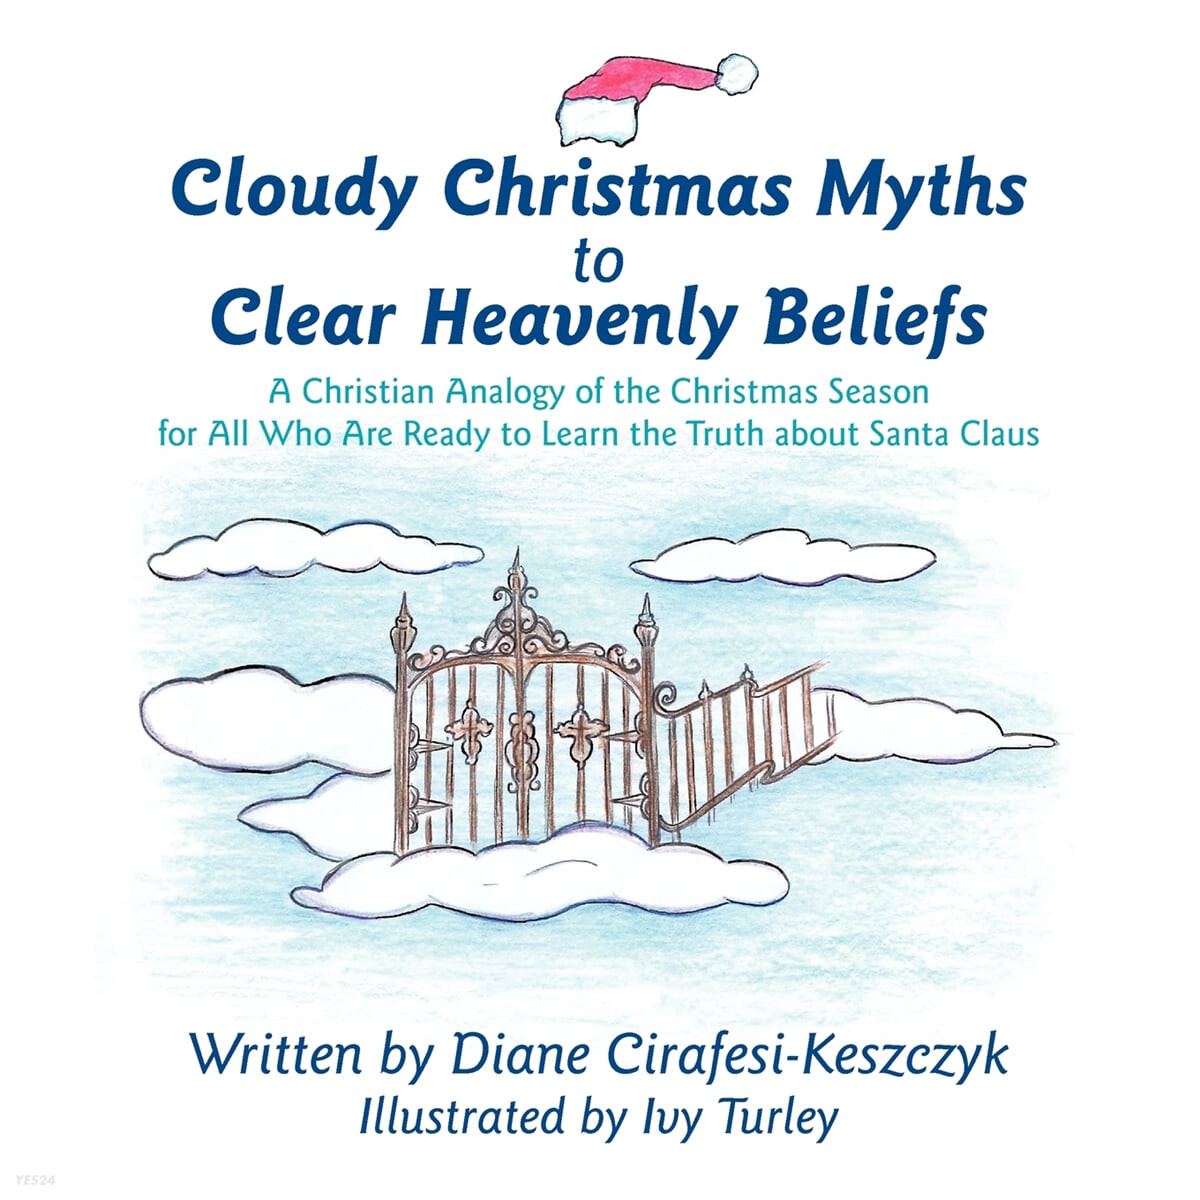 Cloudy Christmas Myths to Clear Heavenly Beliefs (A Christian Analogy of the Christmas Season for All Who Are Ready to Learn the Truth about Santa Claus)